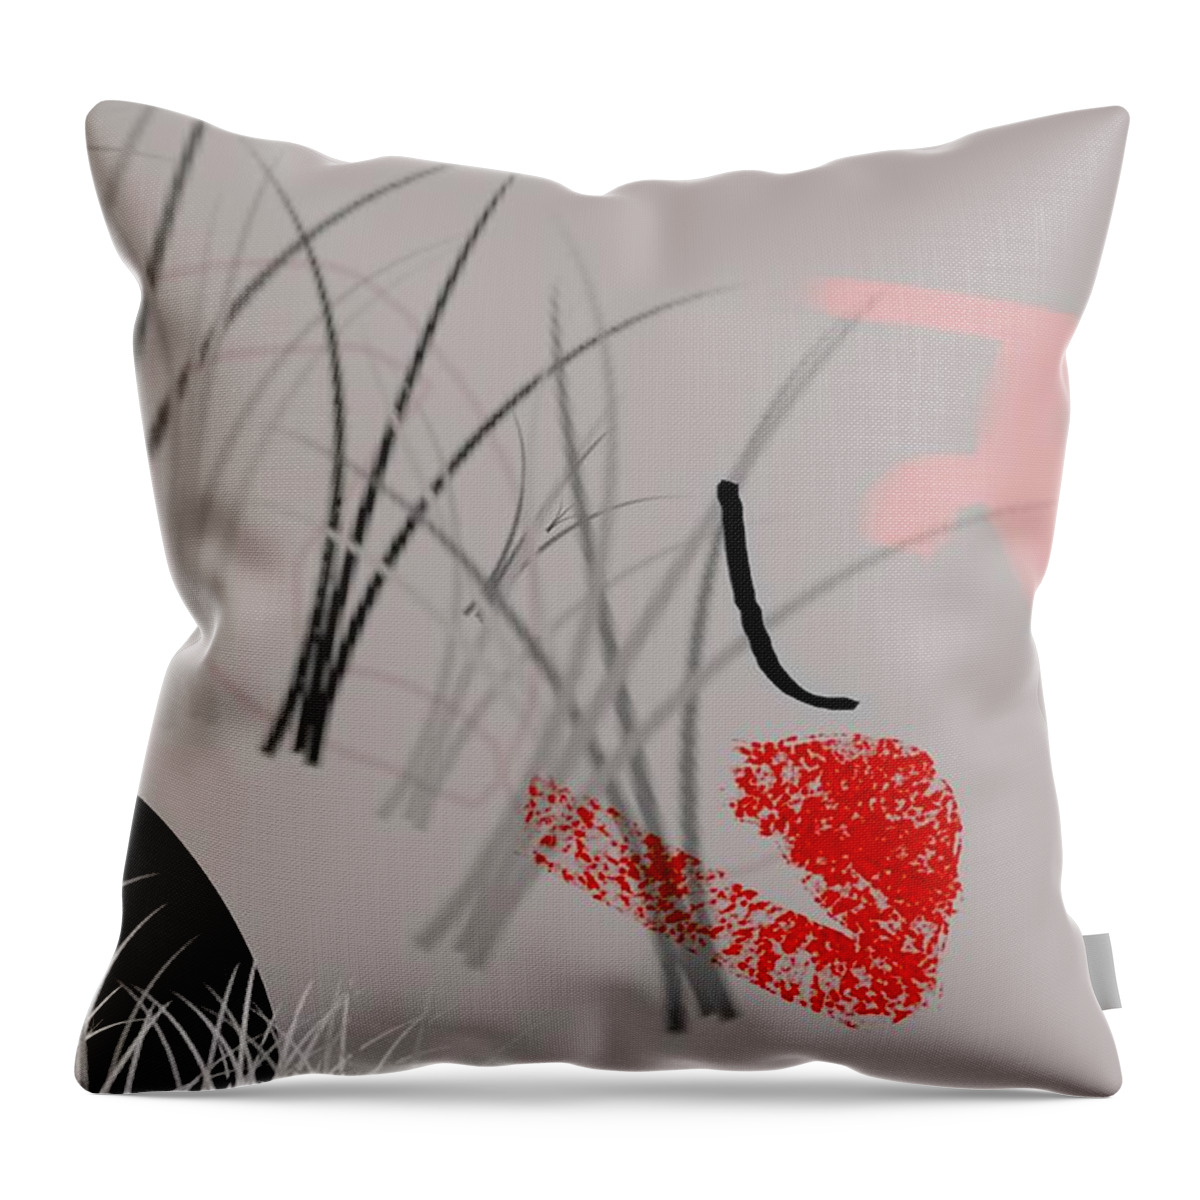 Abstract Throw Pillow featuring the photograph Survival by Diana Angstadt